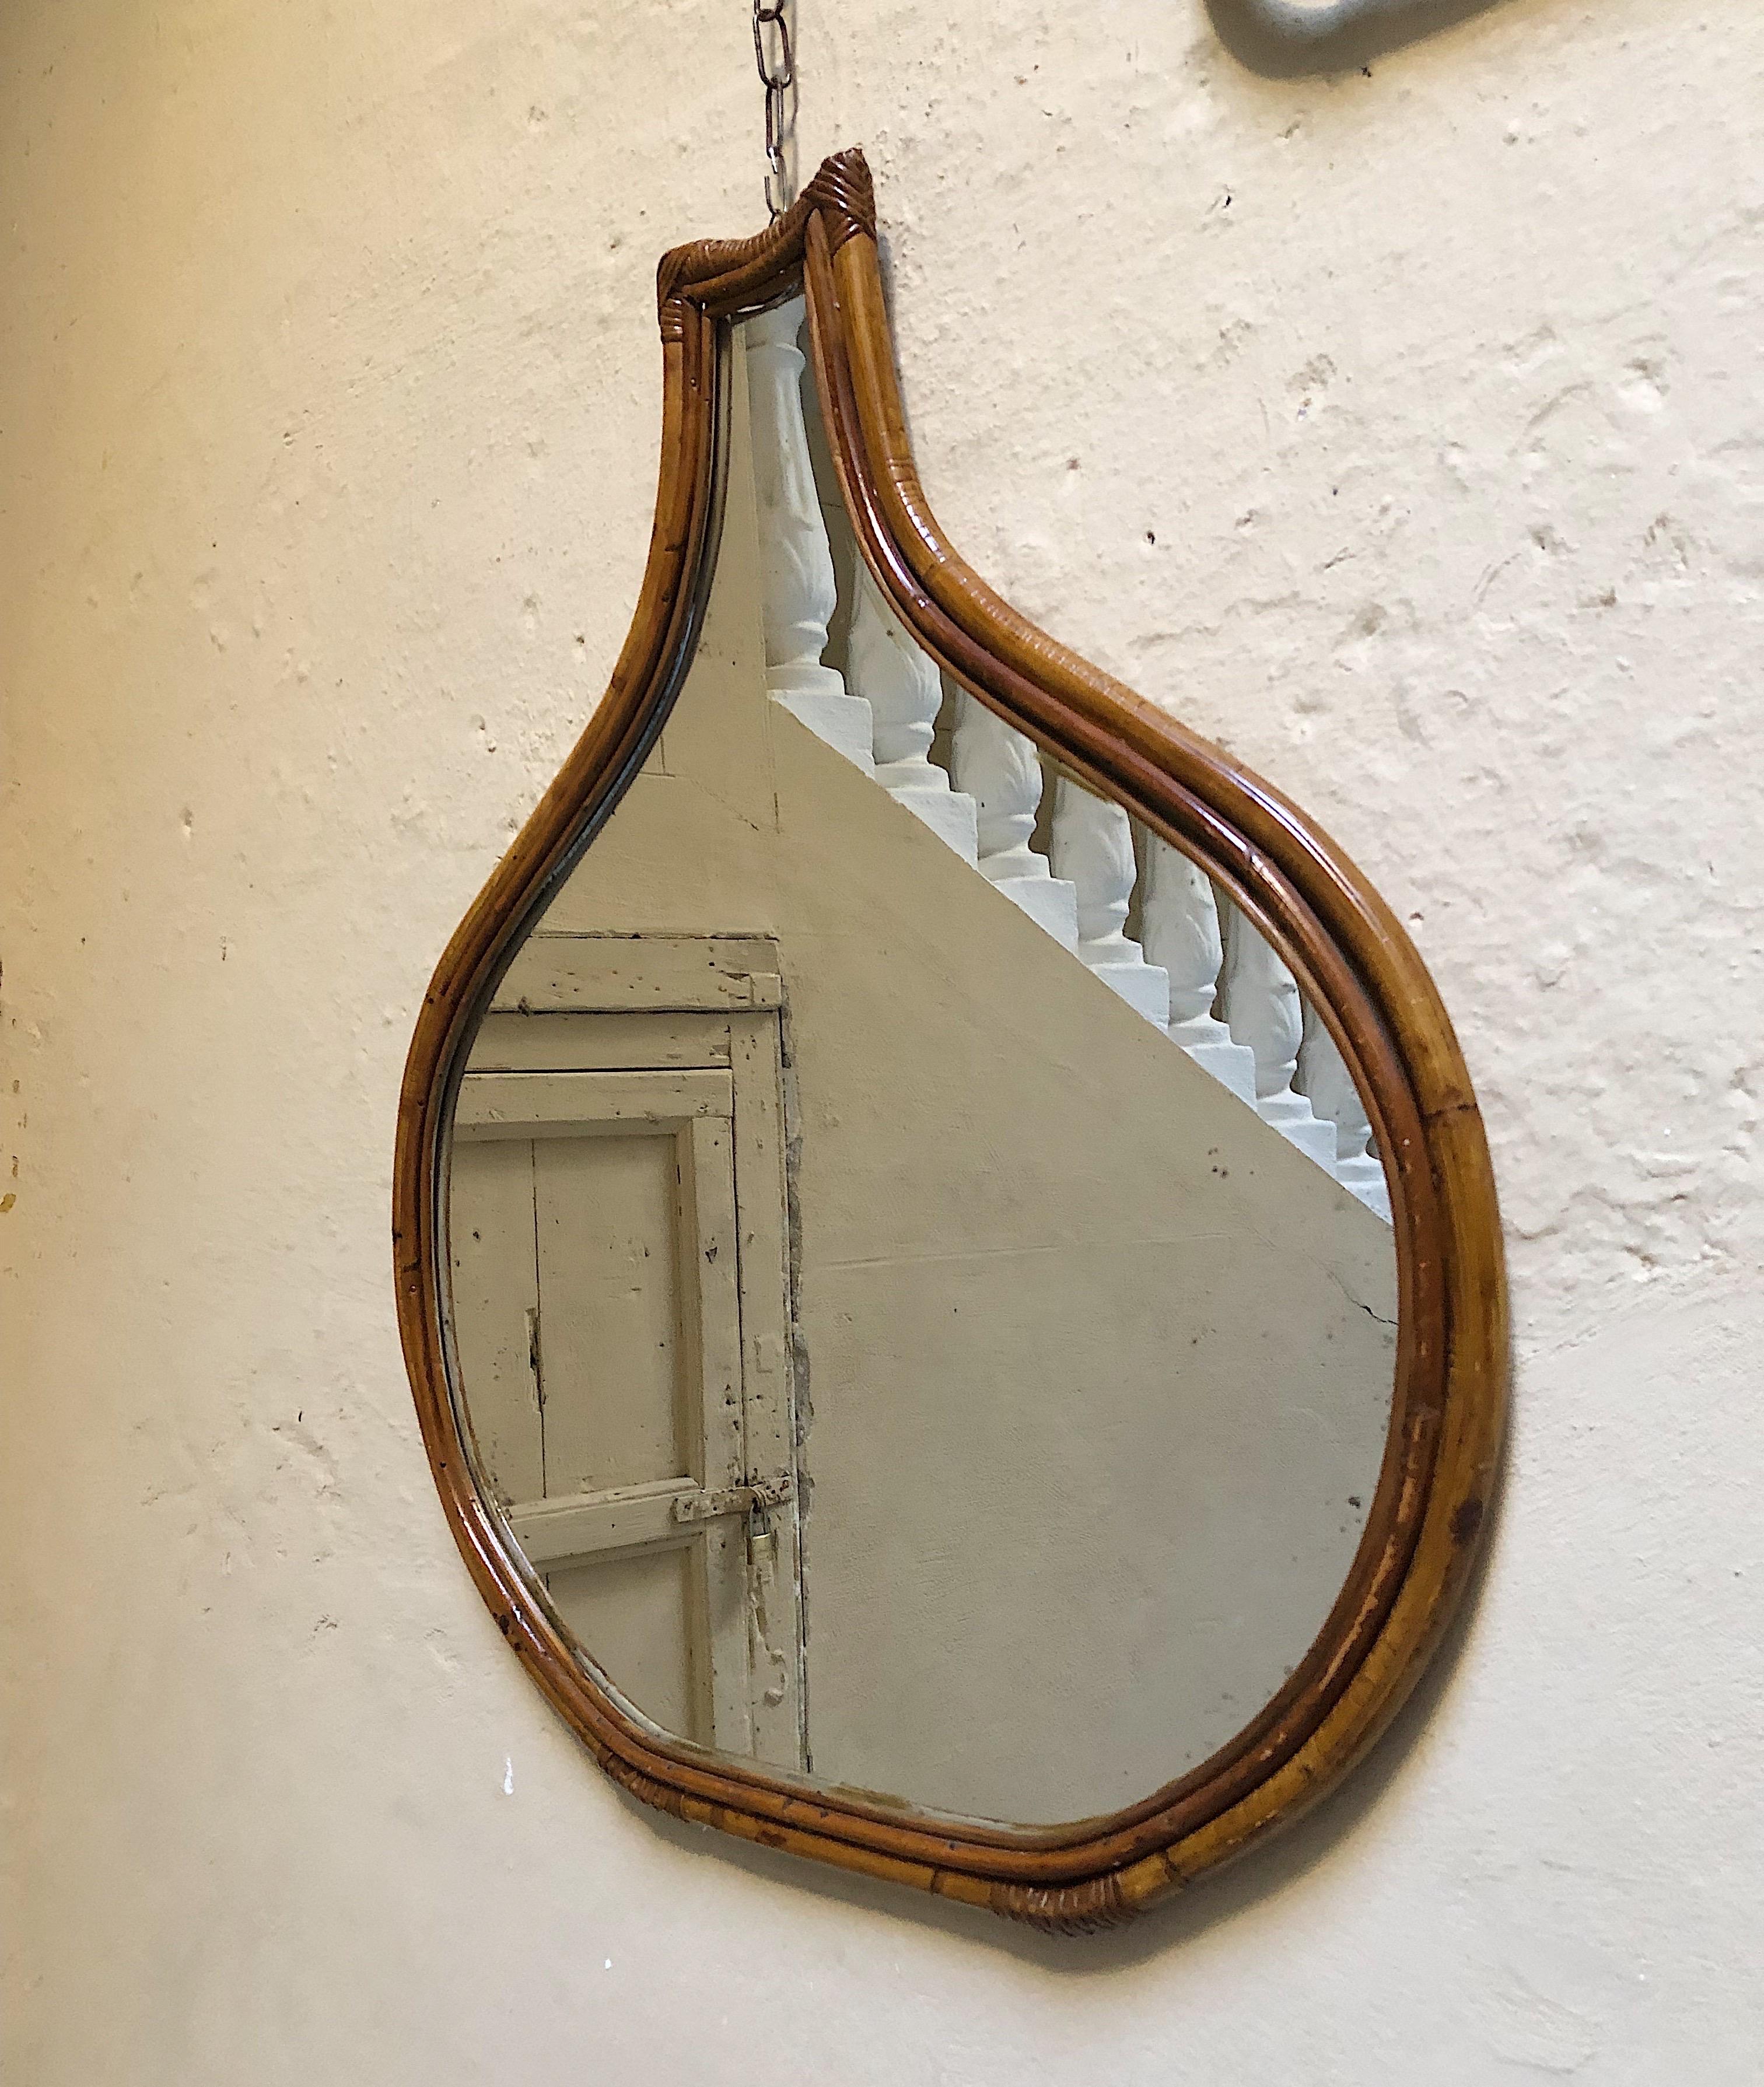 Take a gander at this groovy 1970s rattan mirror – it's got this cool round pear shape that's totally one-of-a-kind. We're totally digging its funky vibe.

It's perfect for sprucing up your entrance, living room, or even chilling out on the veranda.